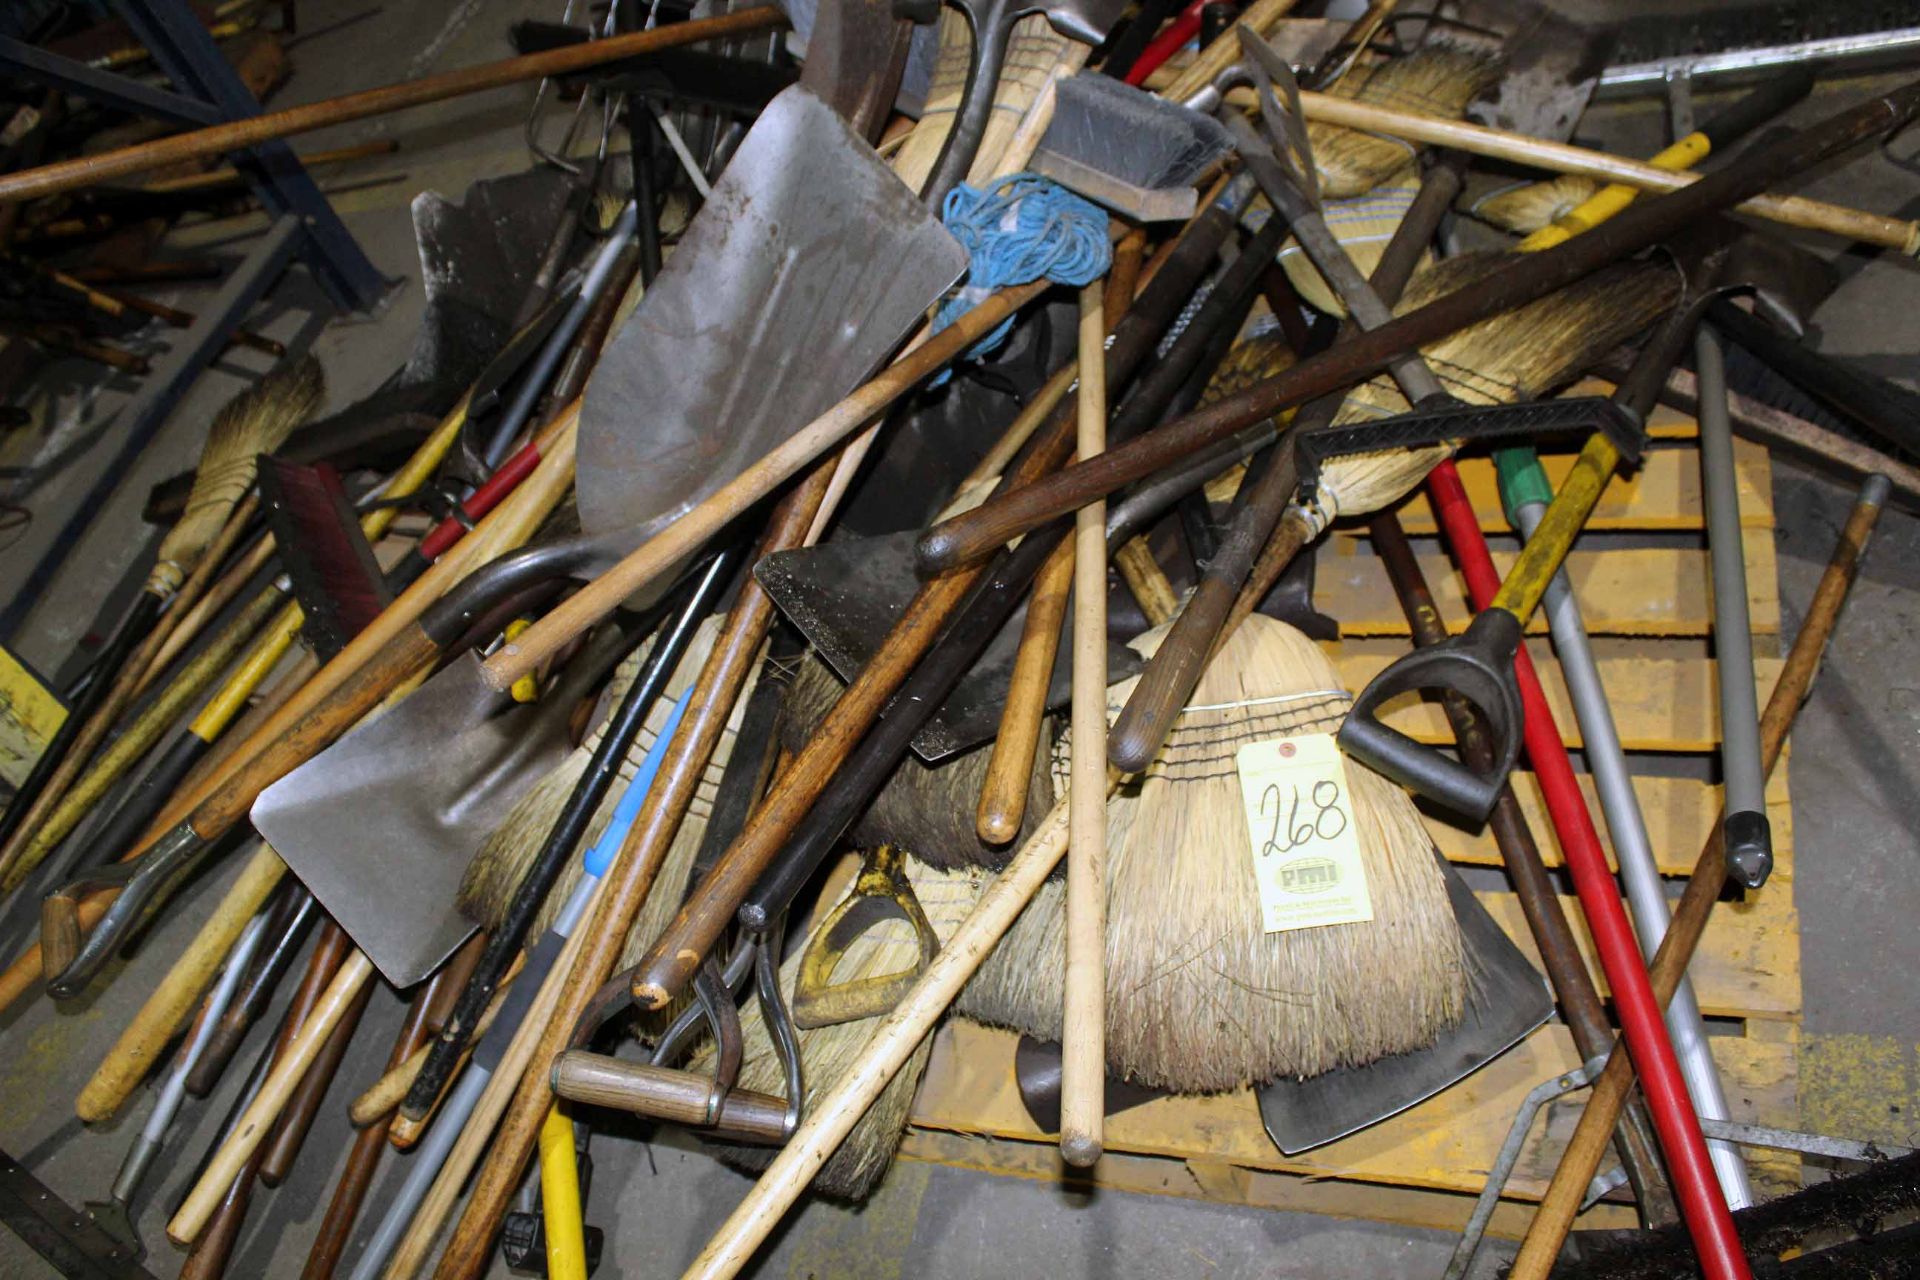 LOT CONSISTING OF: brooms, shovels, squeegees, etc.